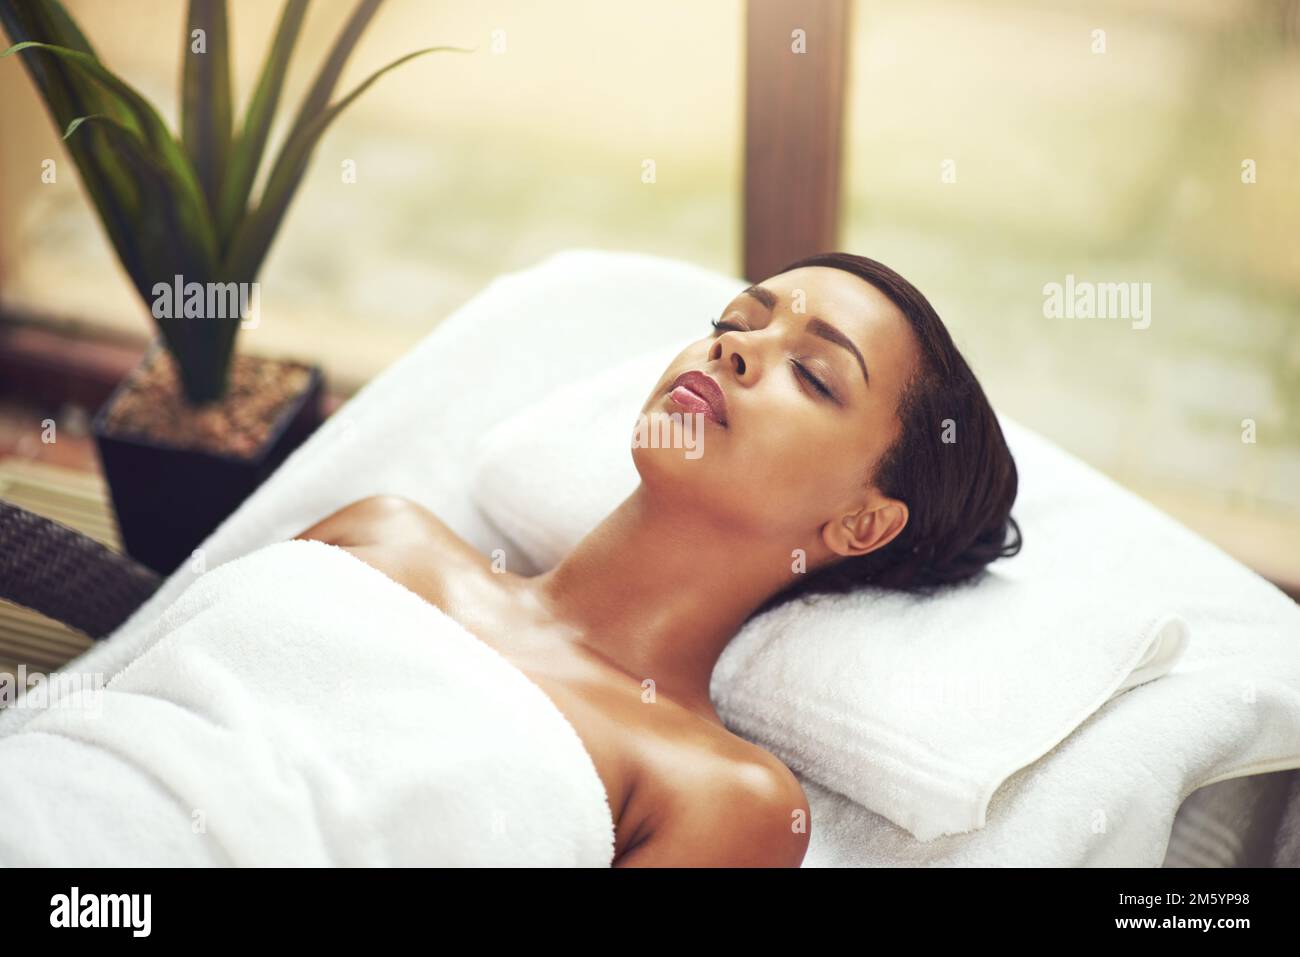 Relaxation begins now. an attractive young woman relaxing on a massage table at a beauty spa. Stock Photo